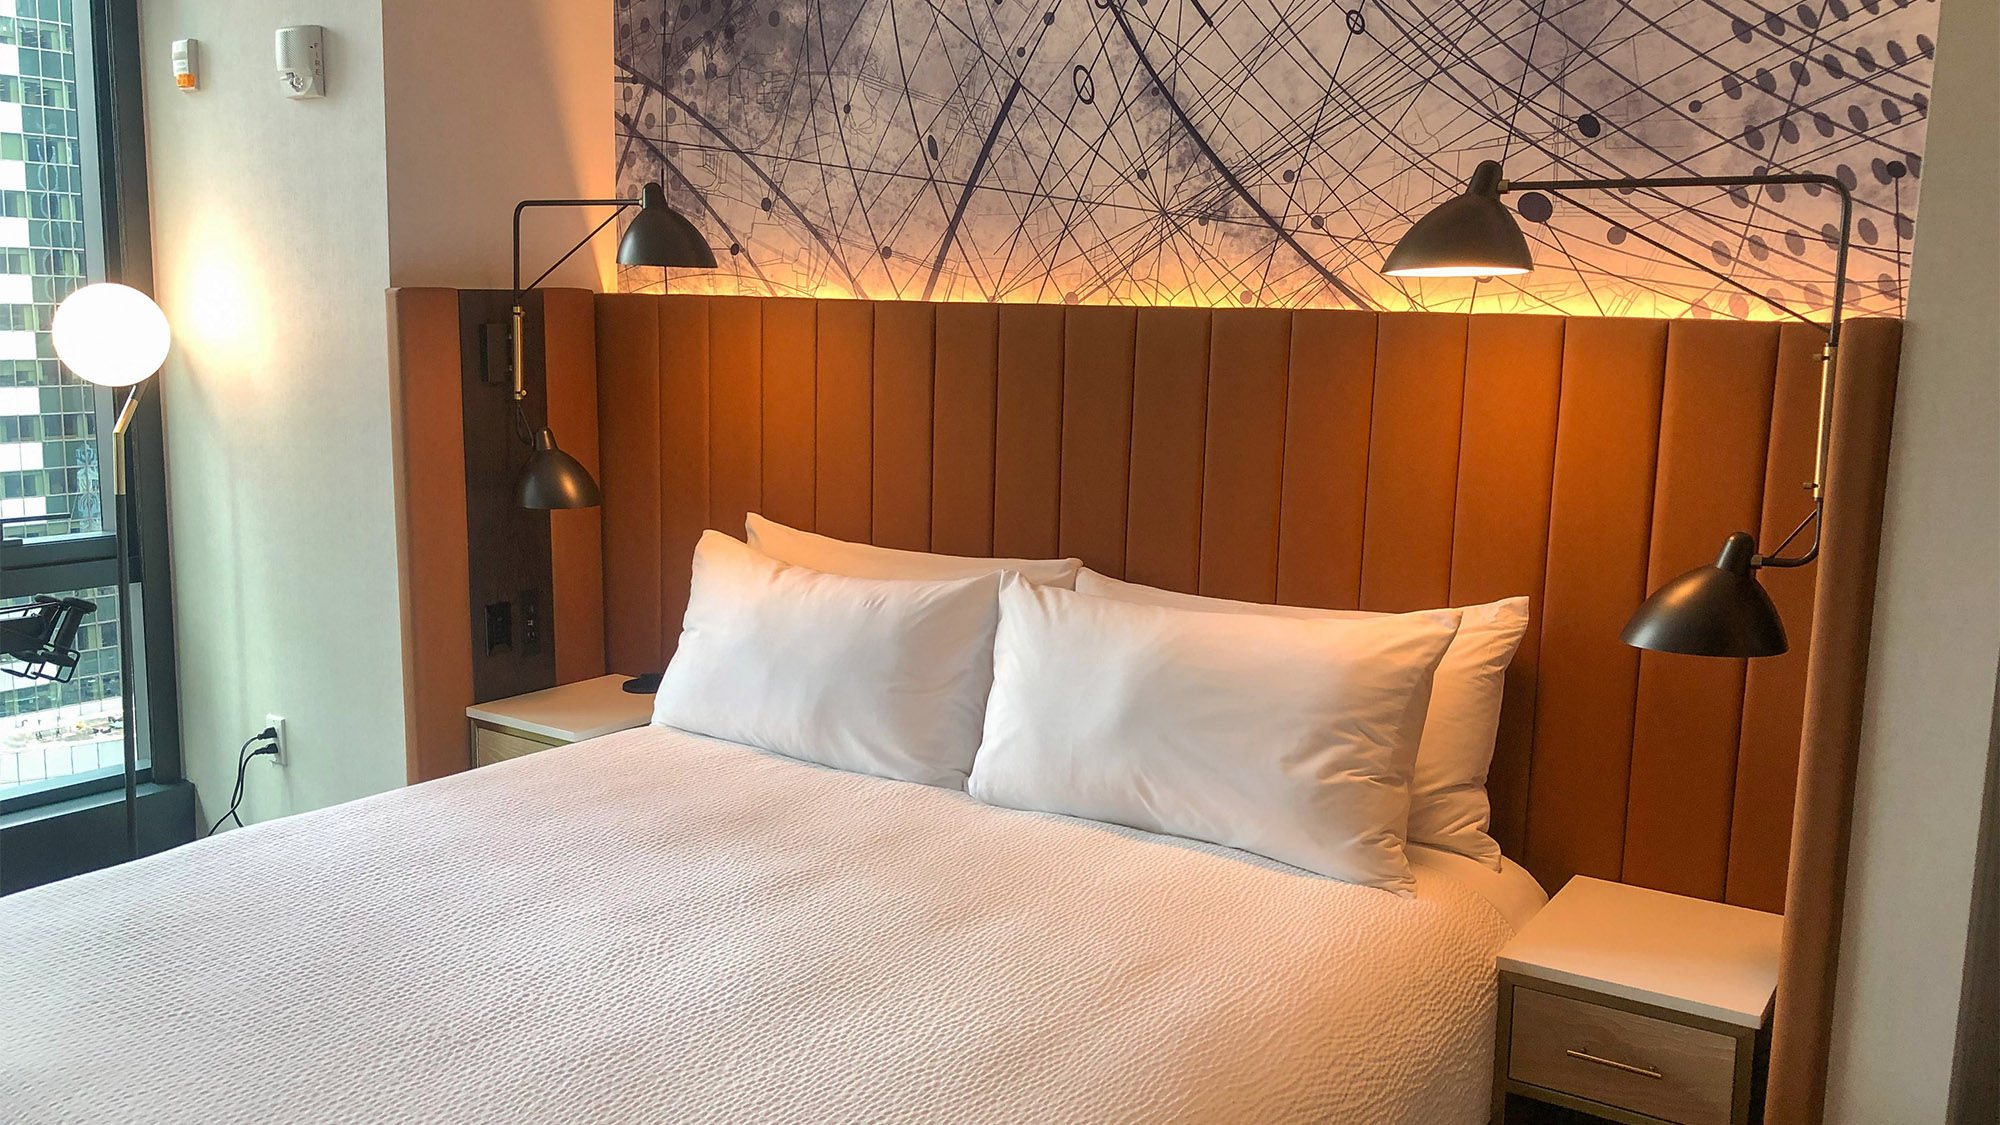 A guestroom at the Tempo by Hilton Times Square.